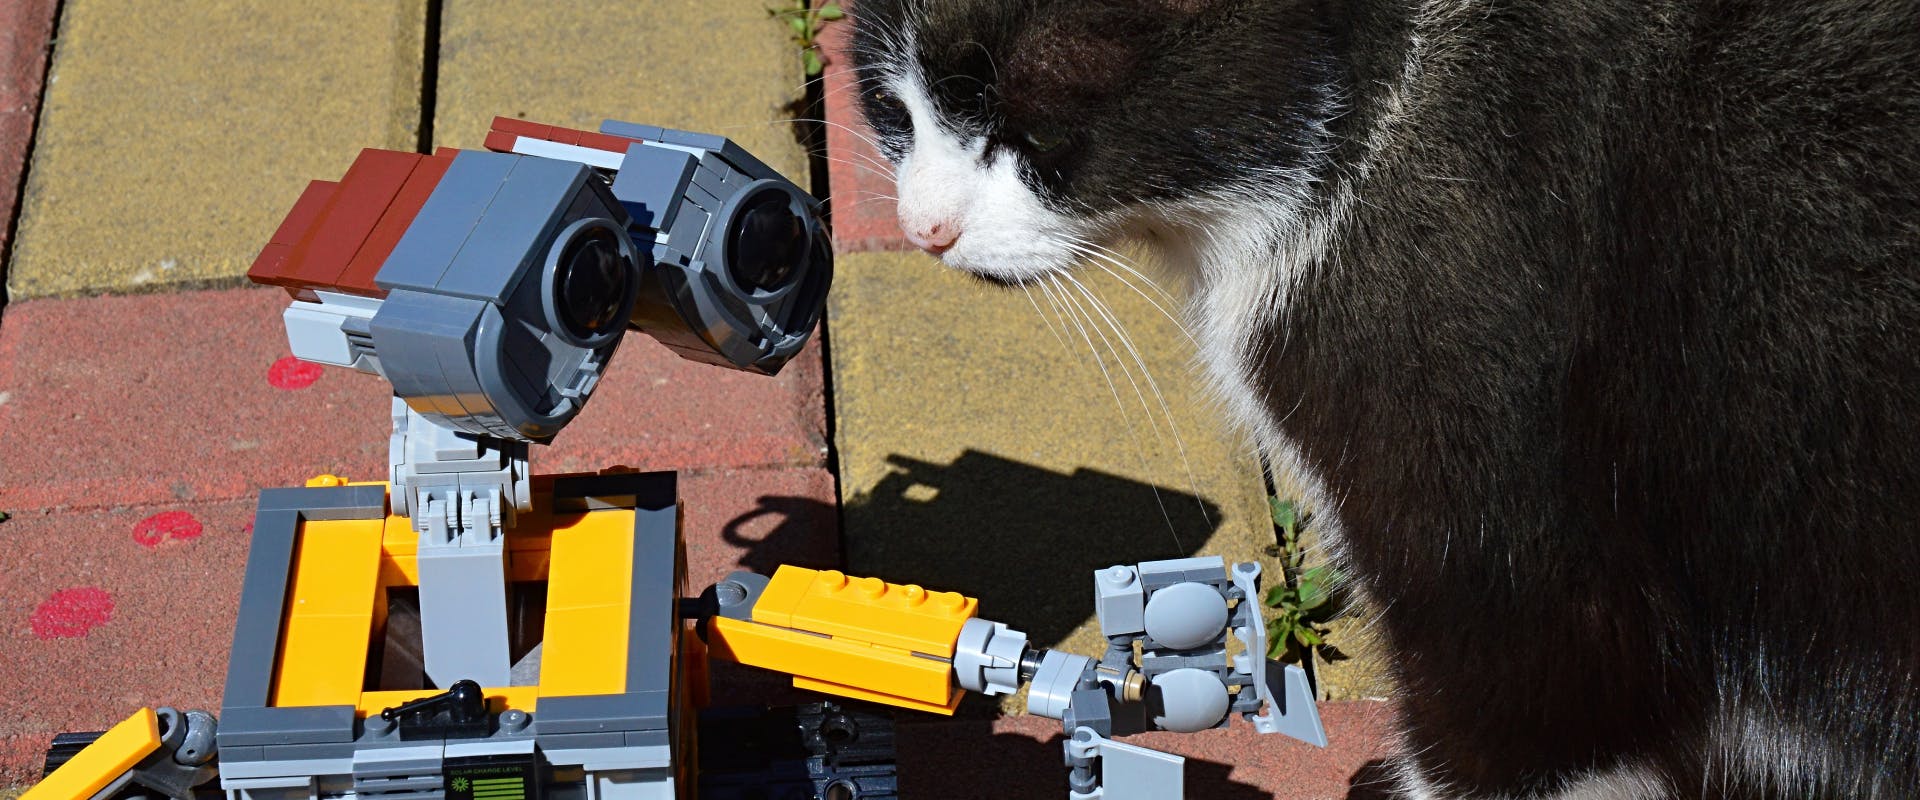 tuxedo cat sniffing a lego robot of Walle